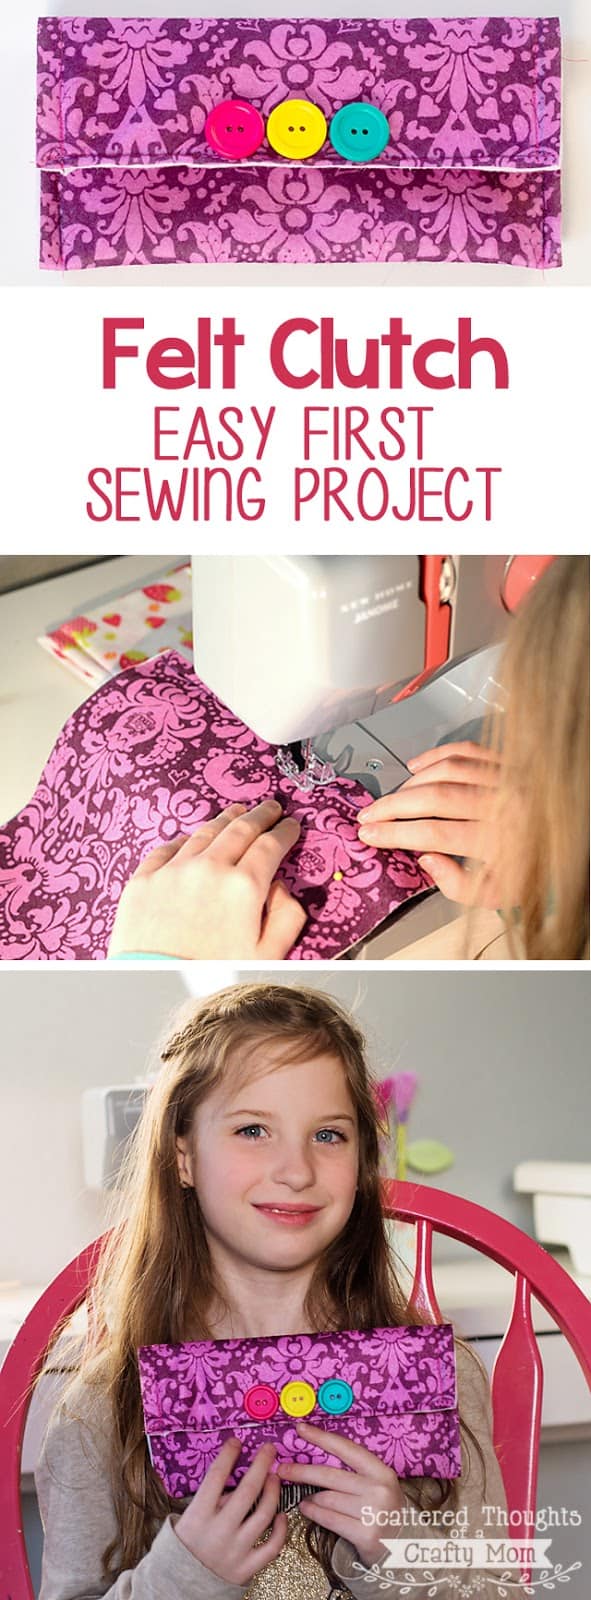 Sewing Projects For 6 Year Olds